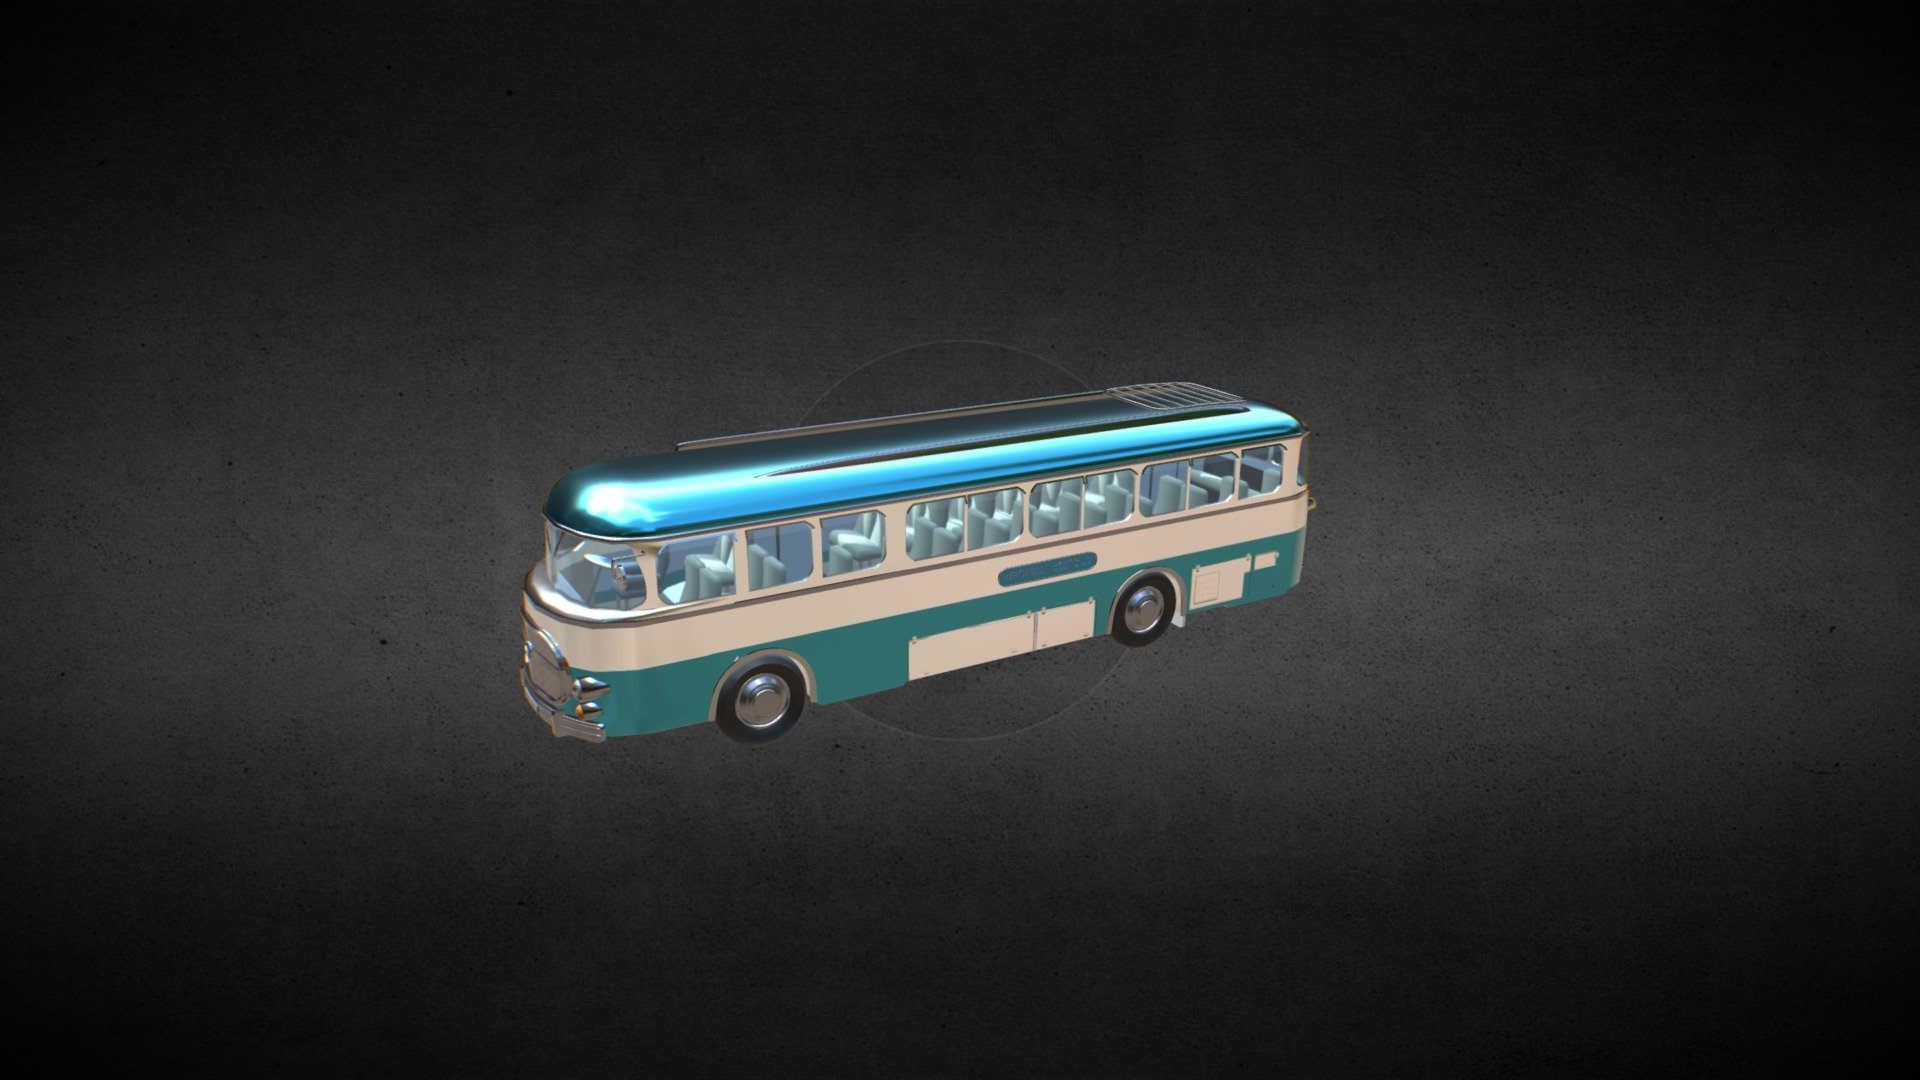 A Game REady 3d Model that i made that past weeks, for more information see my post in Arstation.
Thanks!

Artstation Post - Lancia Esatau V11 (Bus) - 3D model by Ferran.Romero 3d model